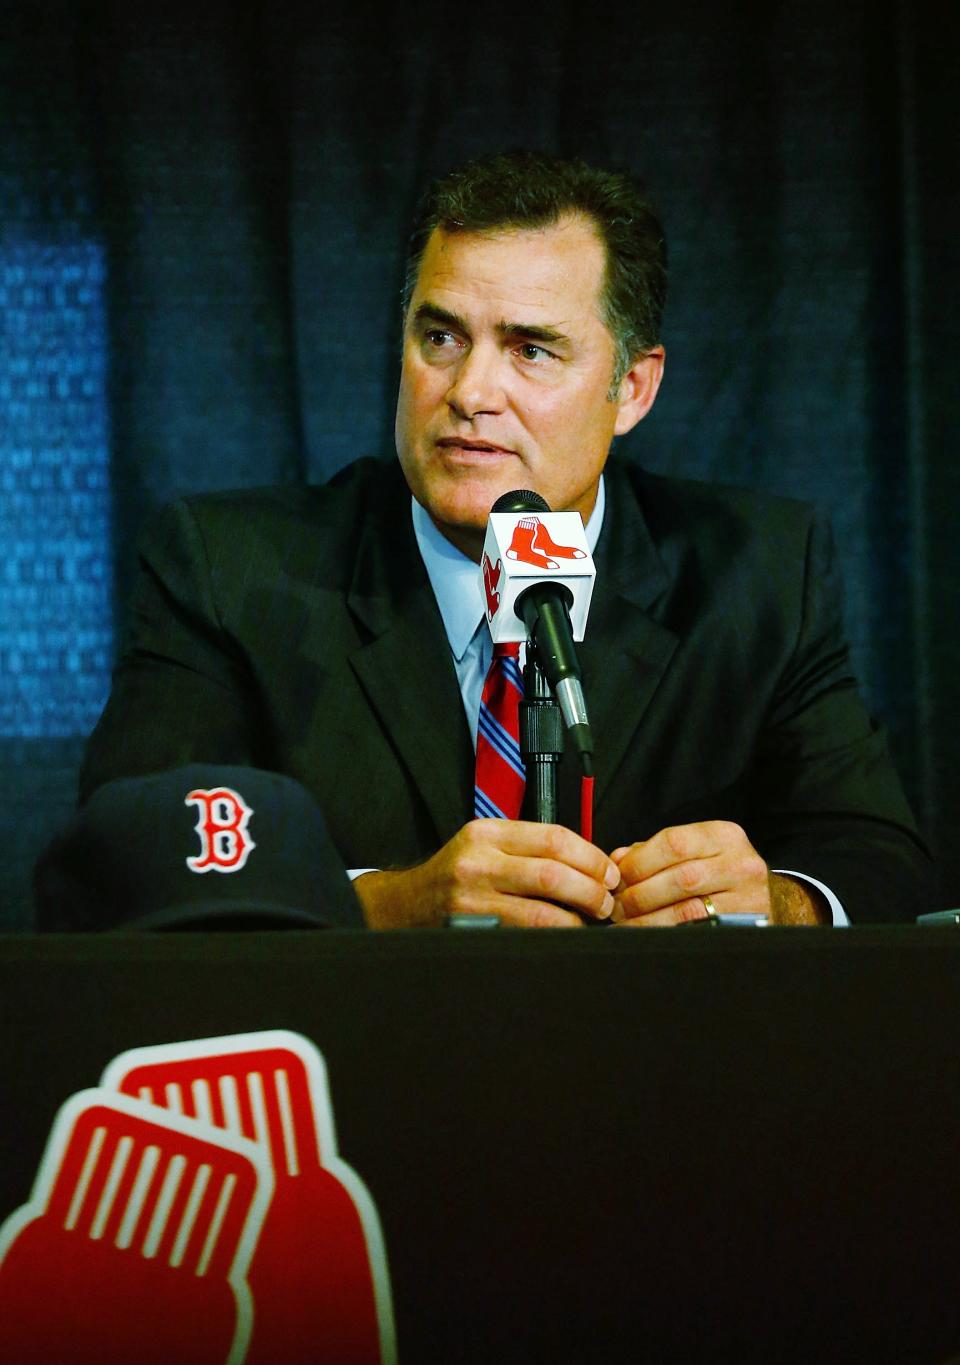 BOSTON, MA - OCTOBER 23: The Boston Red Sox announce John Farrell as the new manager, the 46th manager in the club's 112-year history, on October 23, 2012 at Fenway Park in Boston, Massachusetts. (Photo by Jared Wickerham/Getty Images)